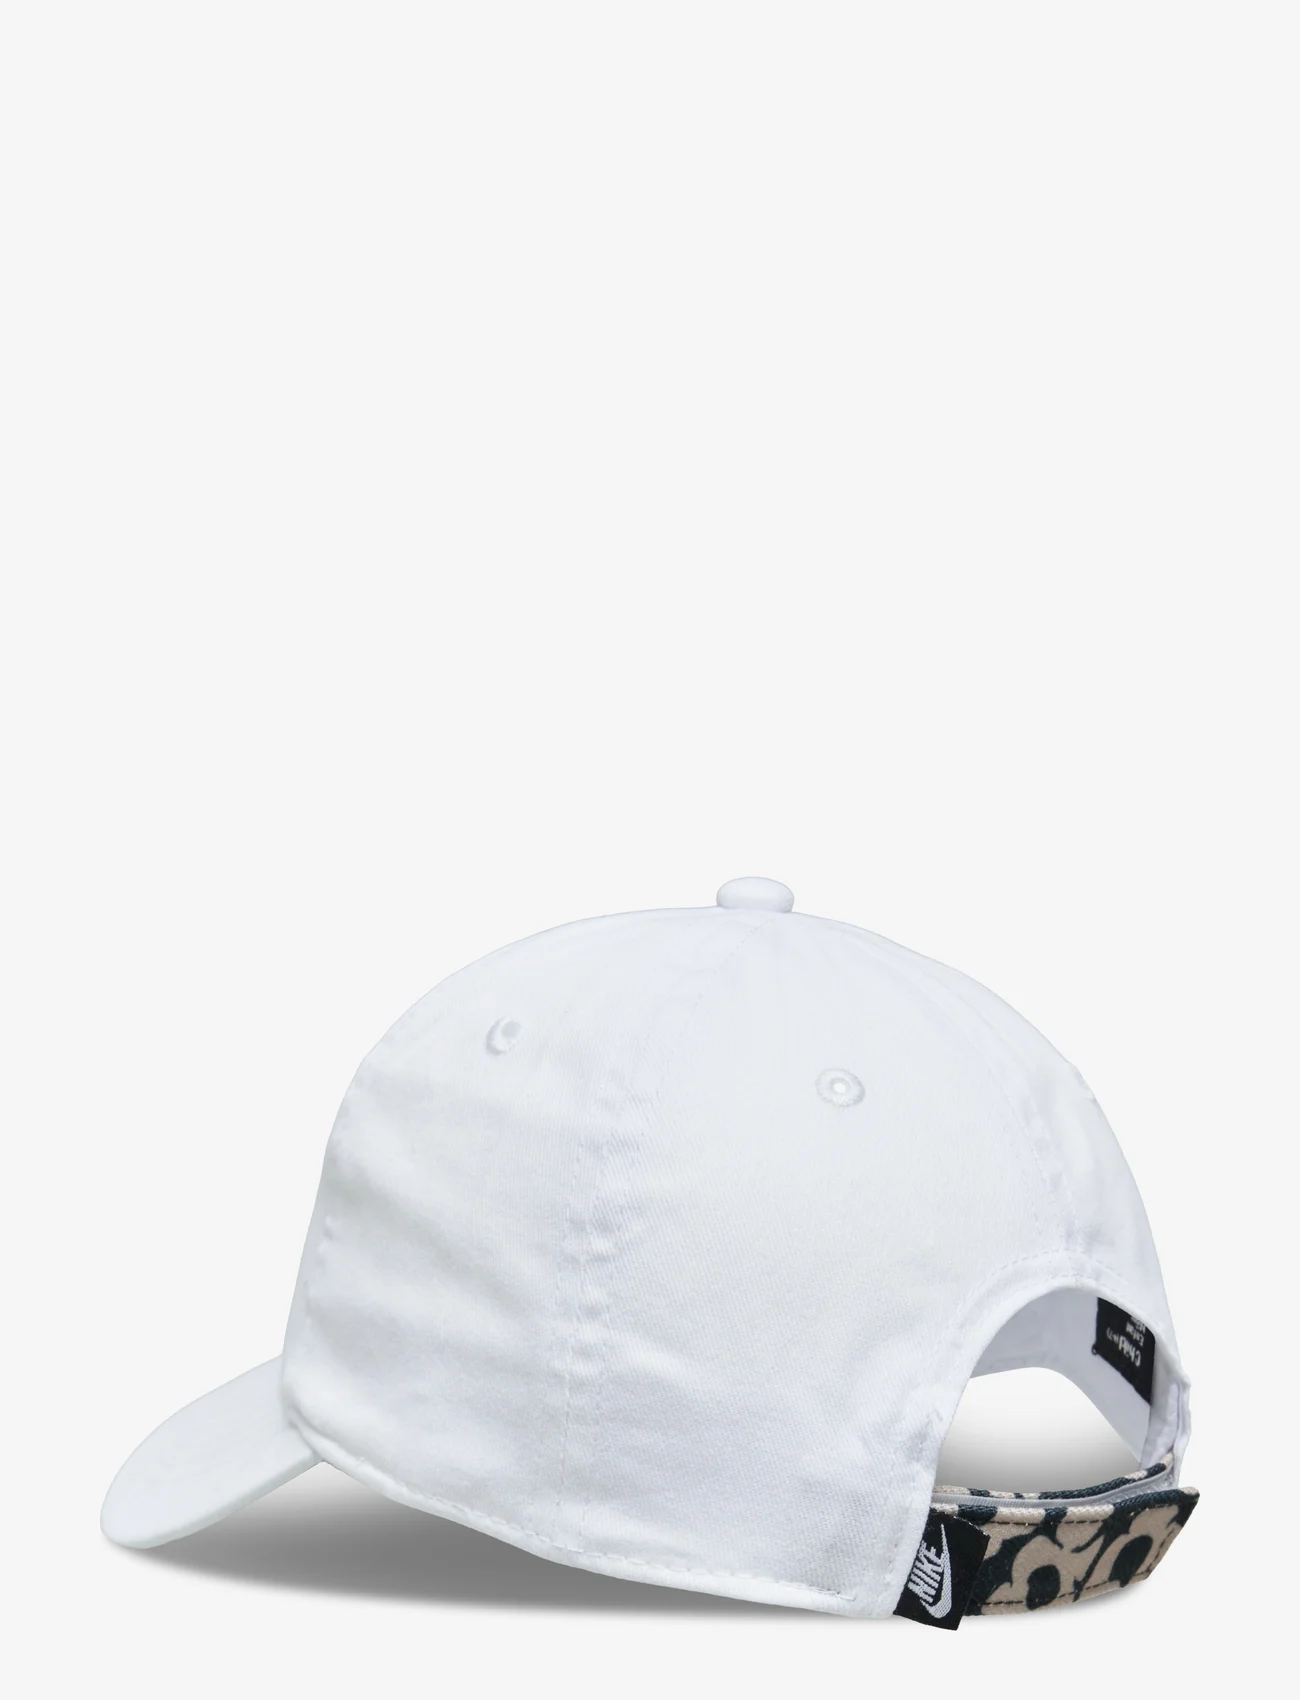 Nike - NAG YOUR MOVE CLUB CAP / NAG YOUR MOVE CLUB CAP - sommerschnäppchen - white - 1